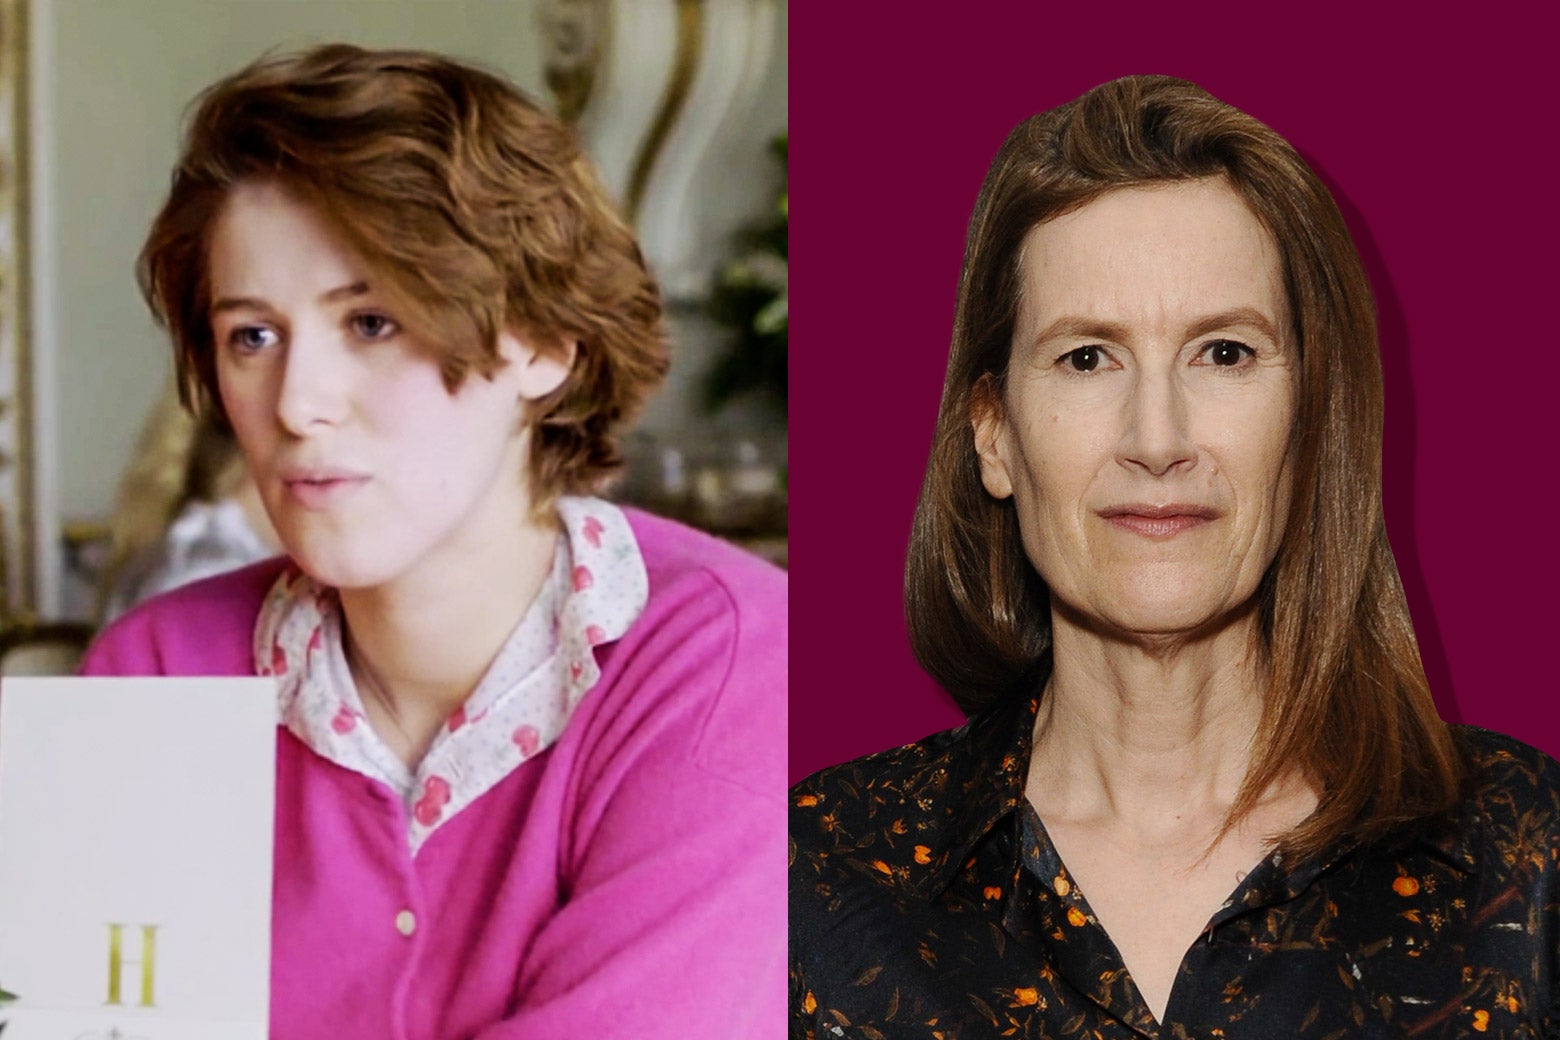 Side-by-side photos of Honor Swinton-Byrne and Joanna Hogg.